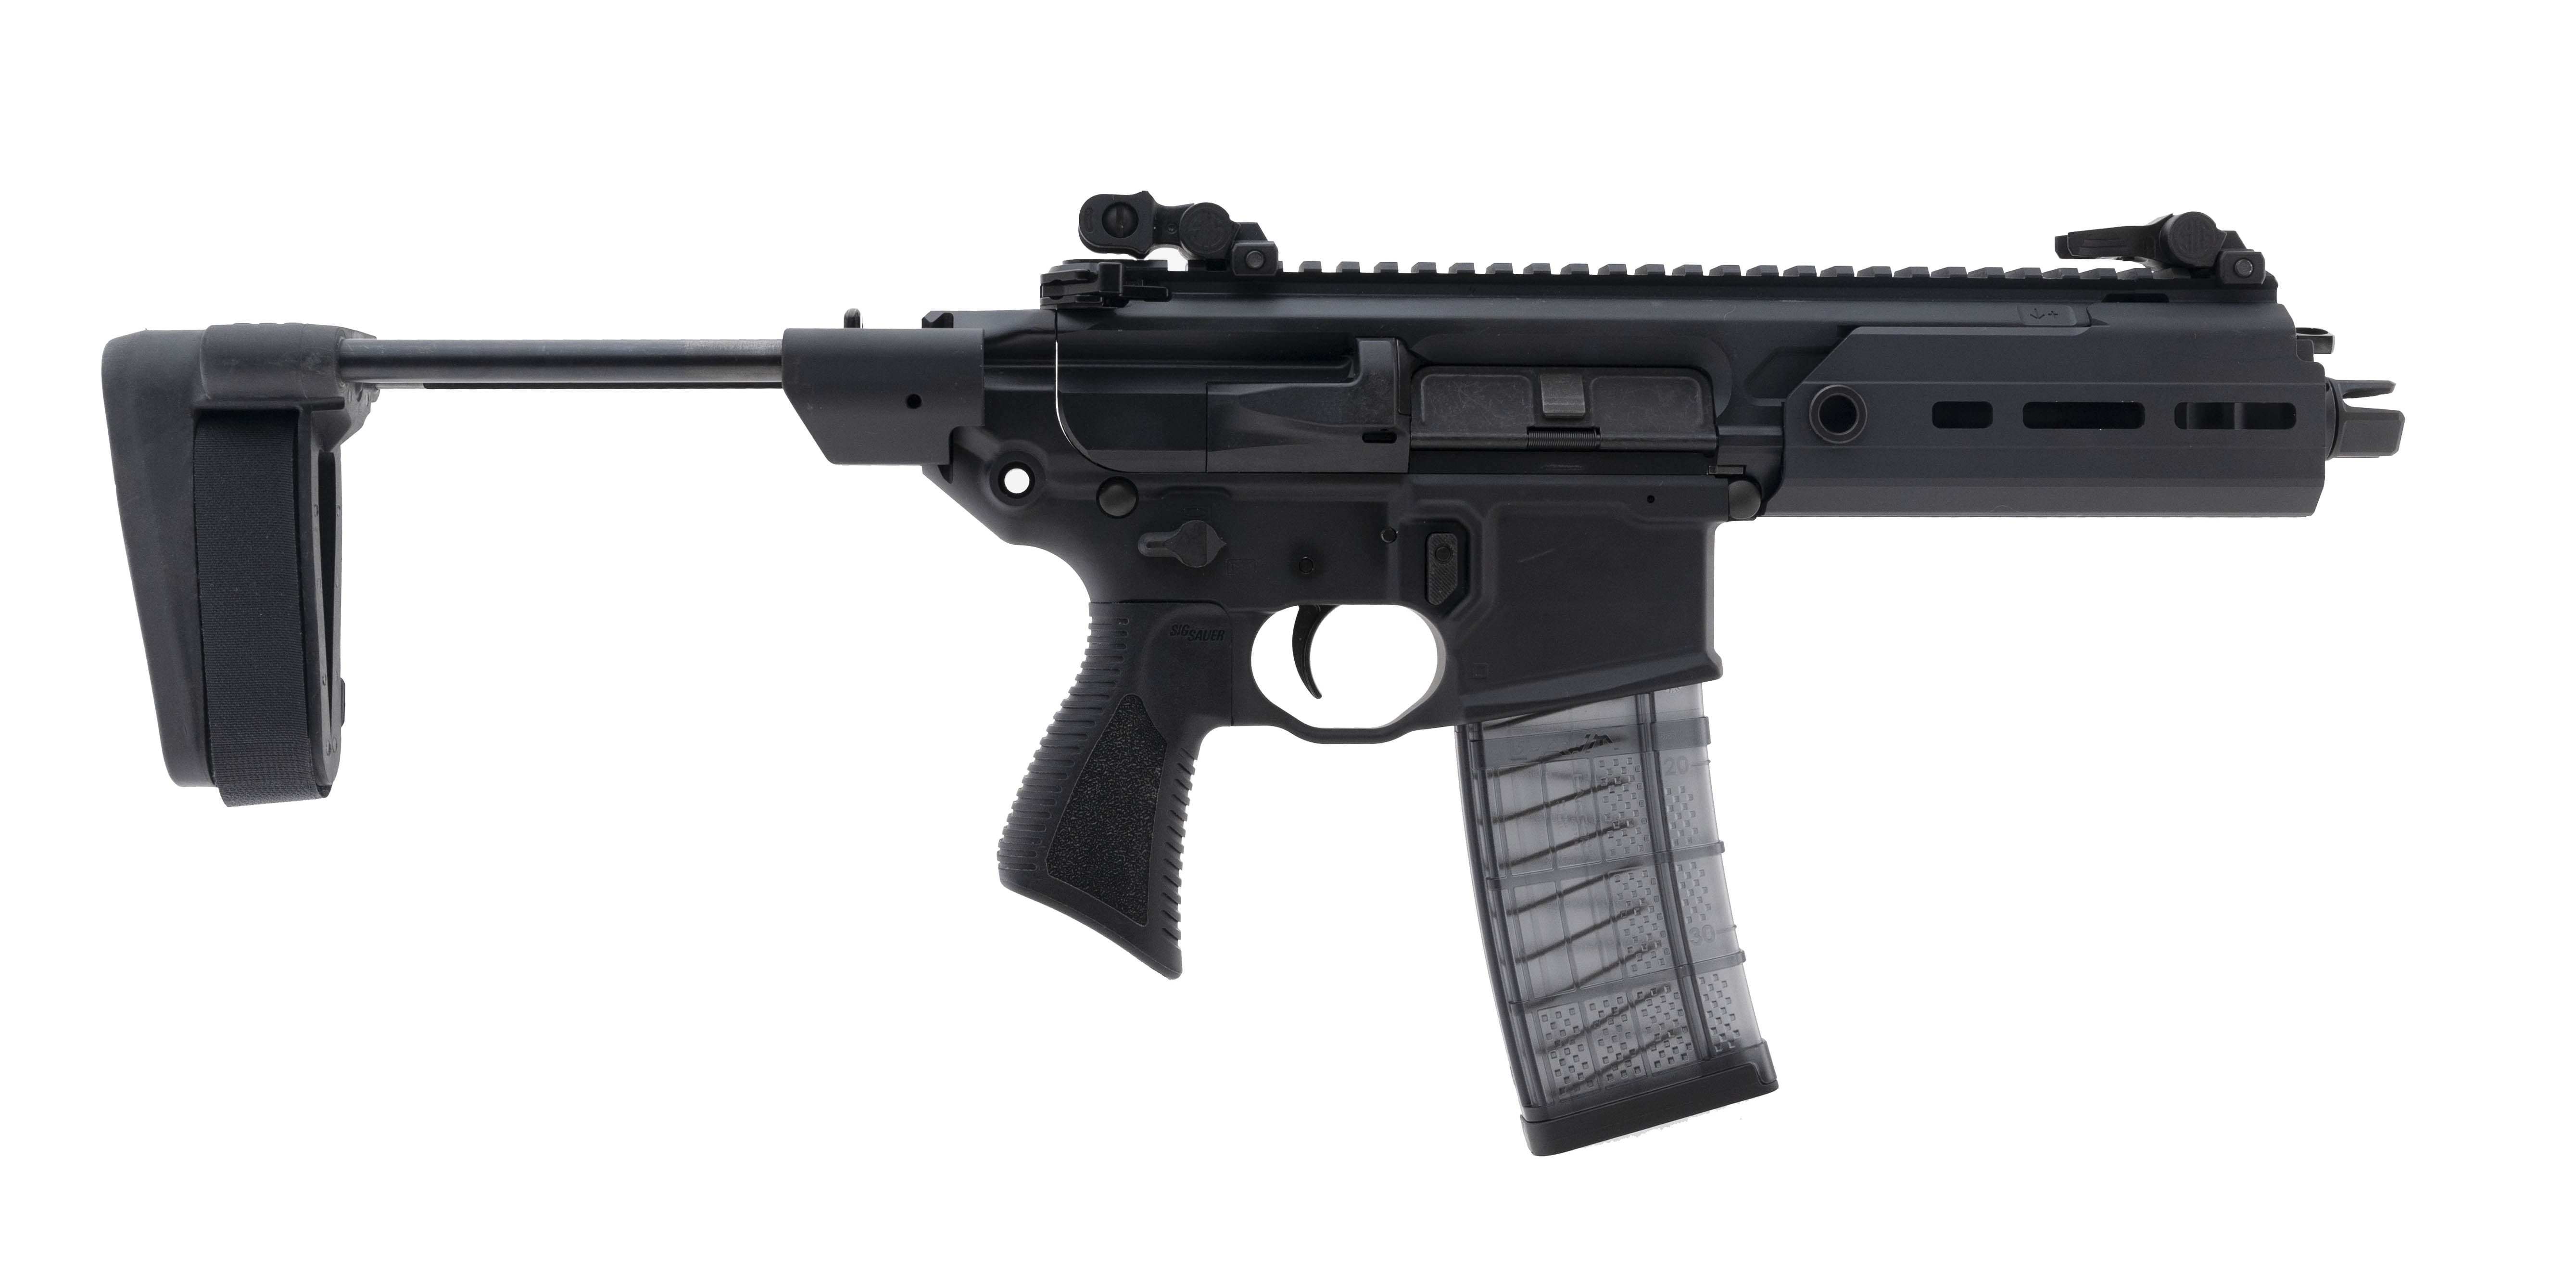 Sig Sauer Mcx Rattler Price - How do you Price a Switches?